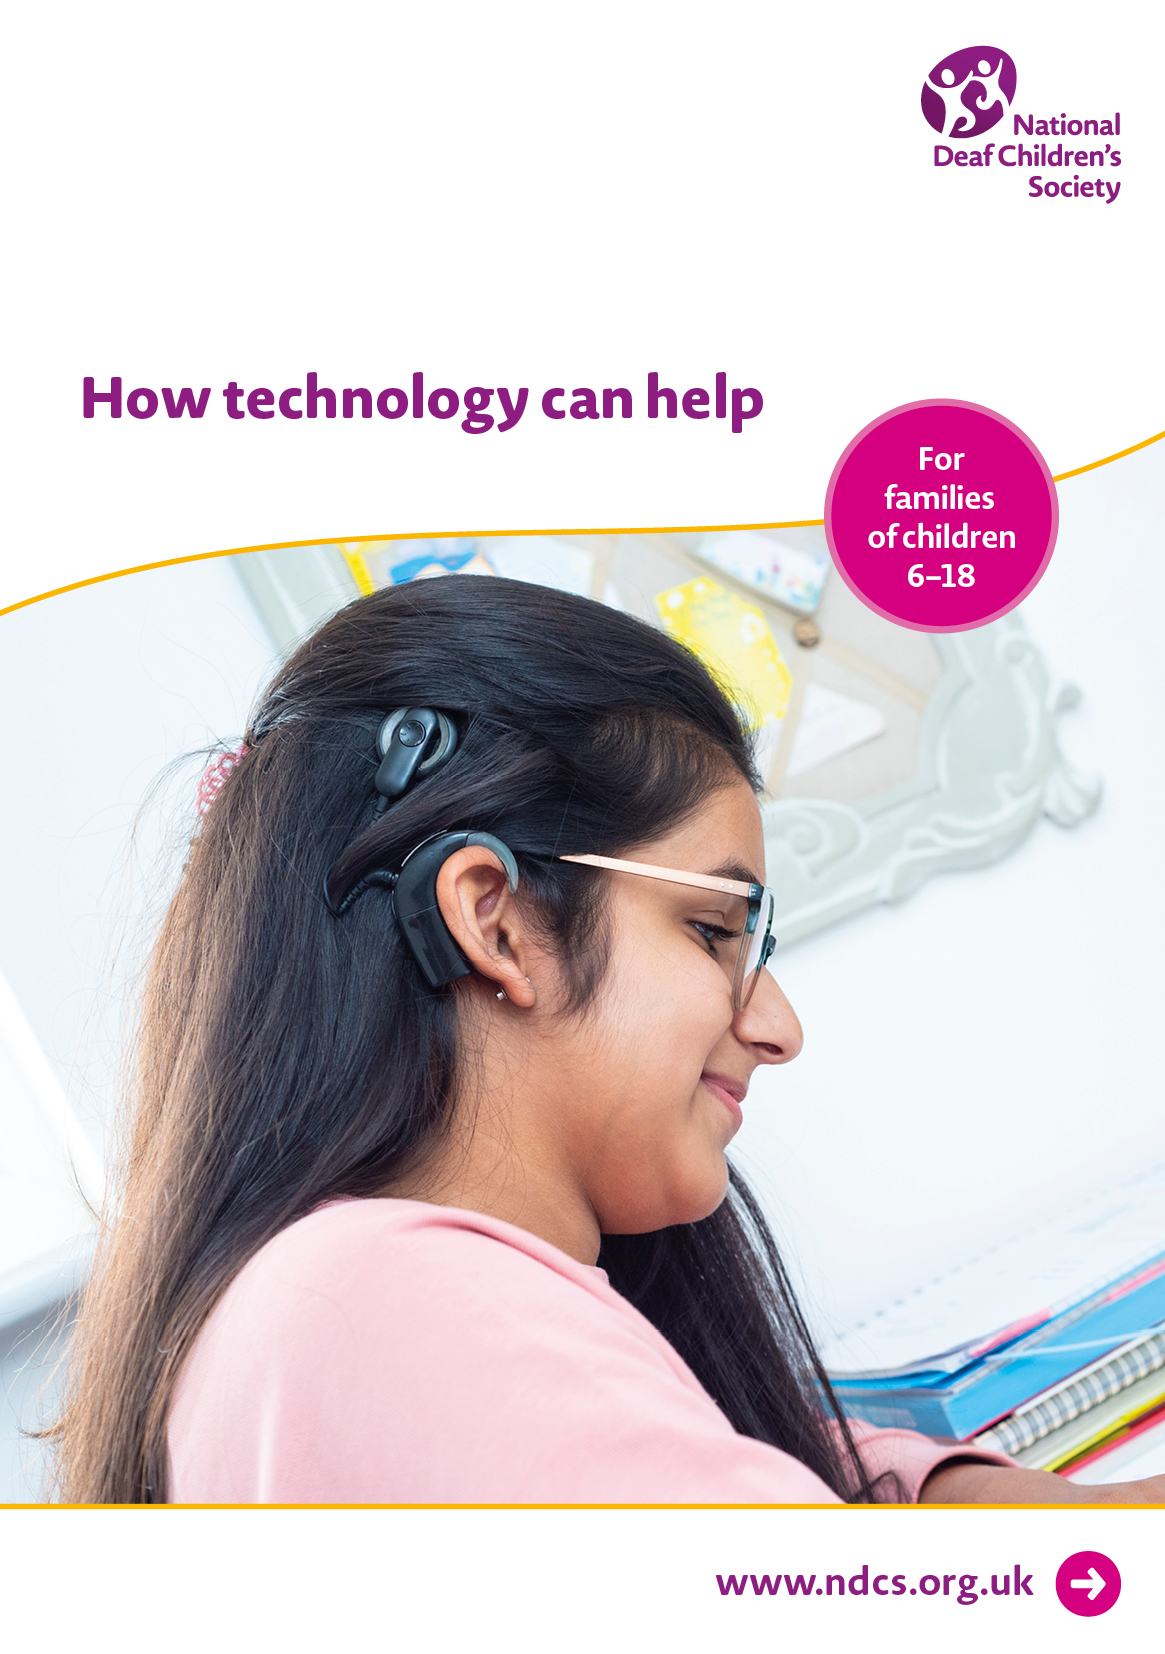 How technology can help: For families of deaf children 6-18